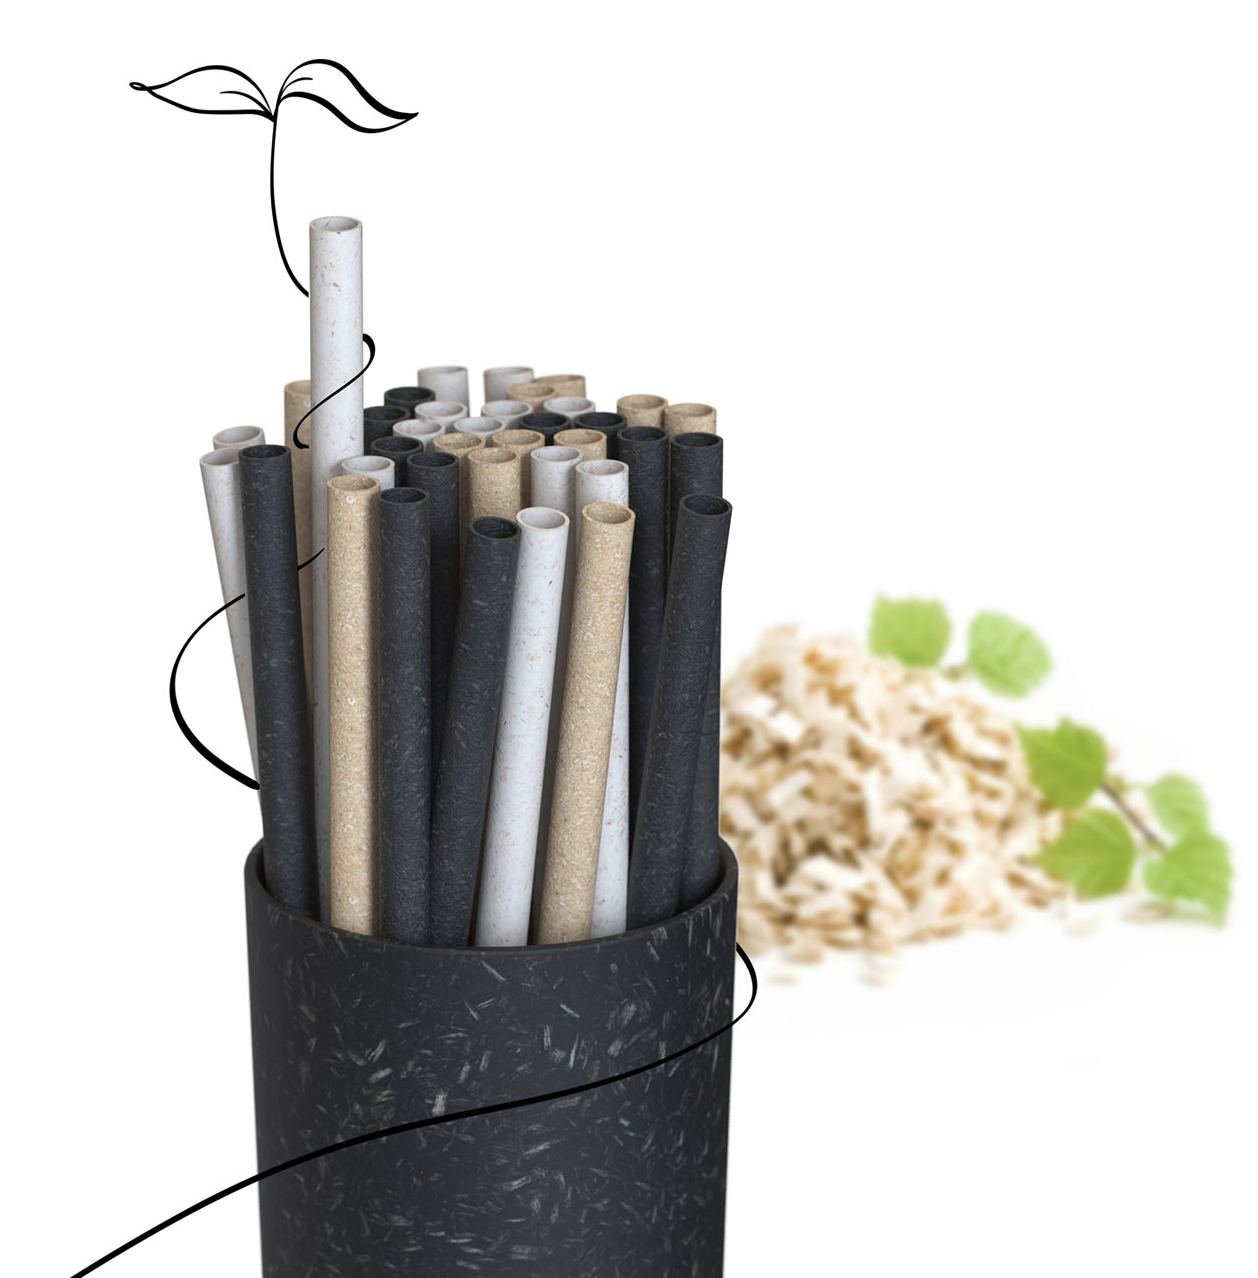 Image of the Sulapac biodegradable plastic alternatives straw